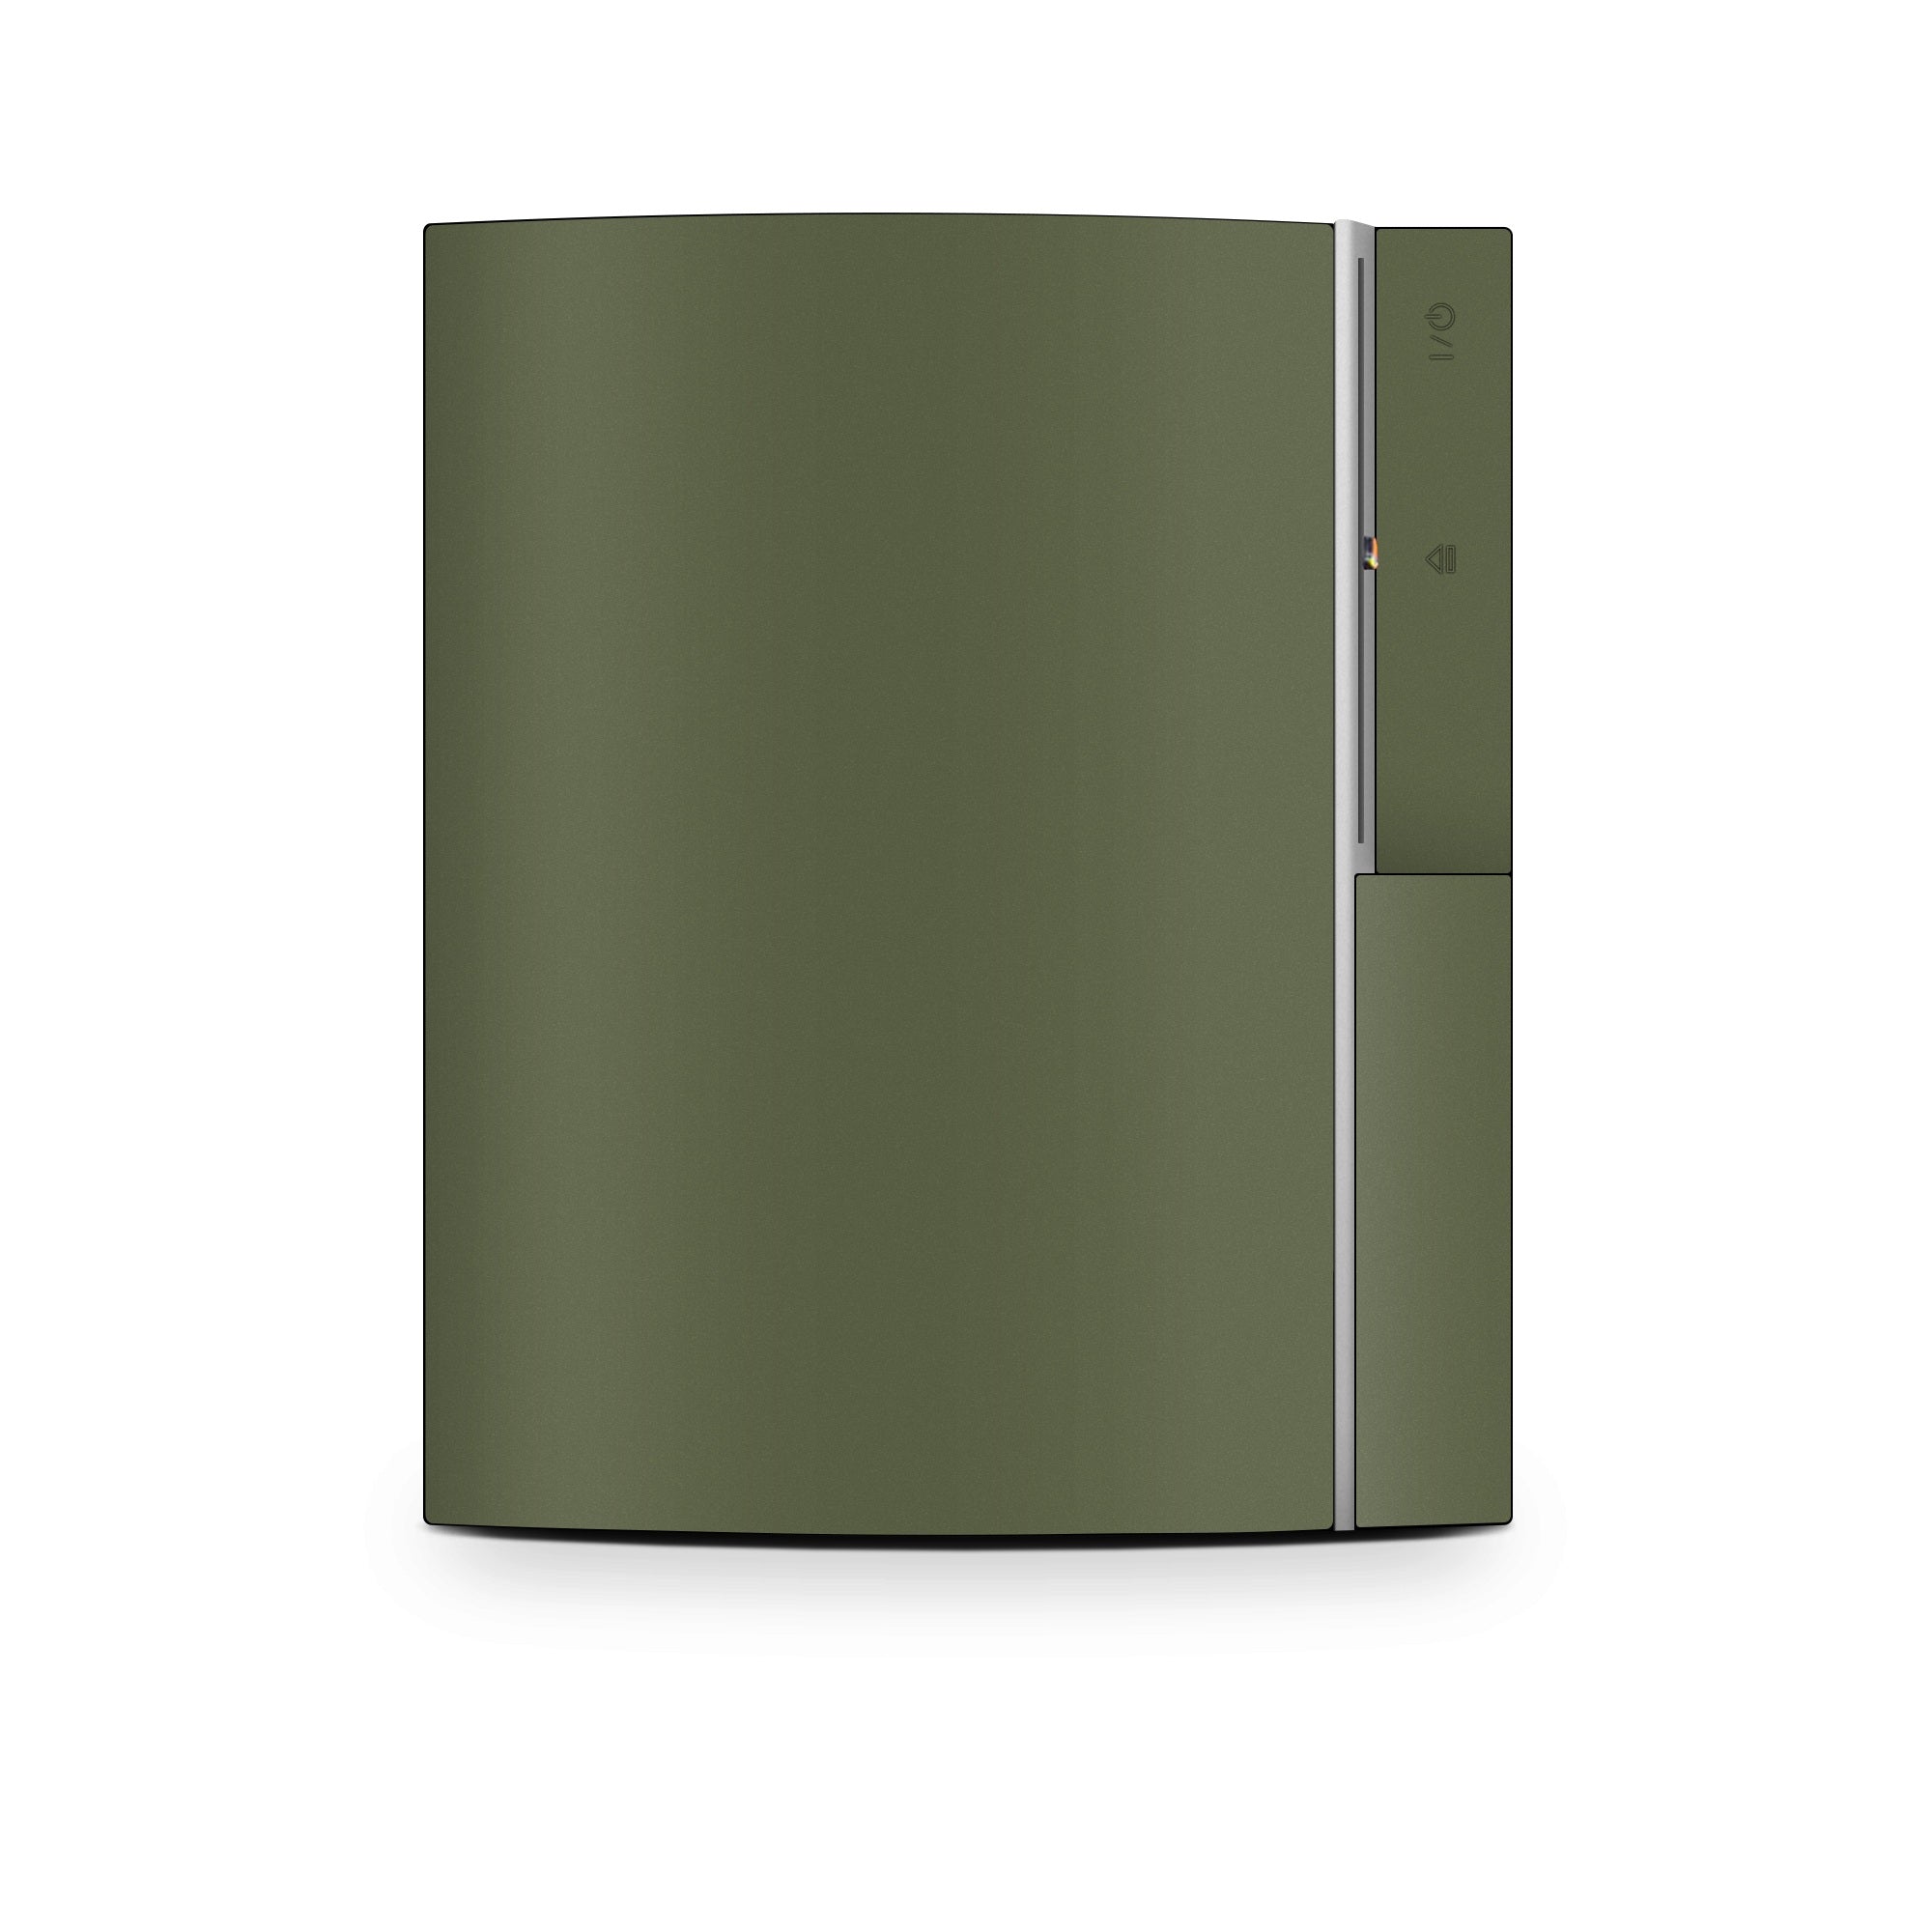 Solid State Olive Drab - Sony PS3 Skin